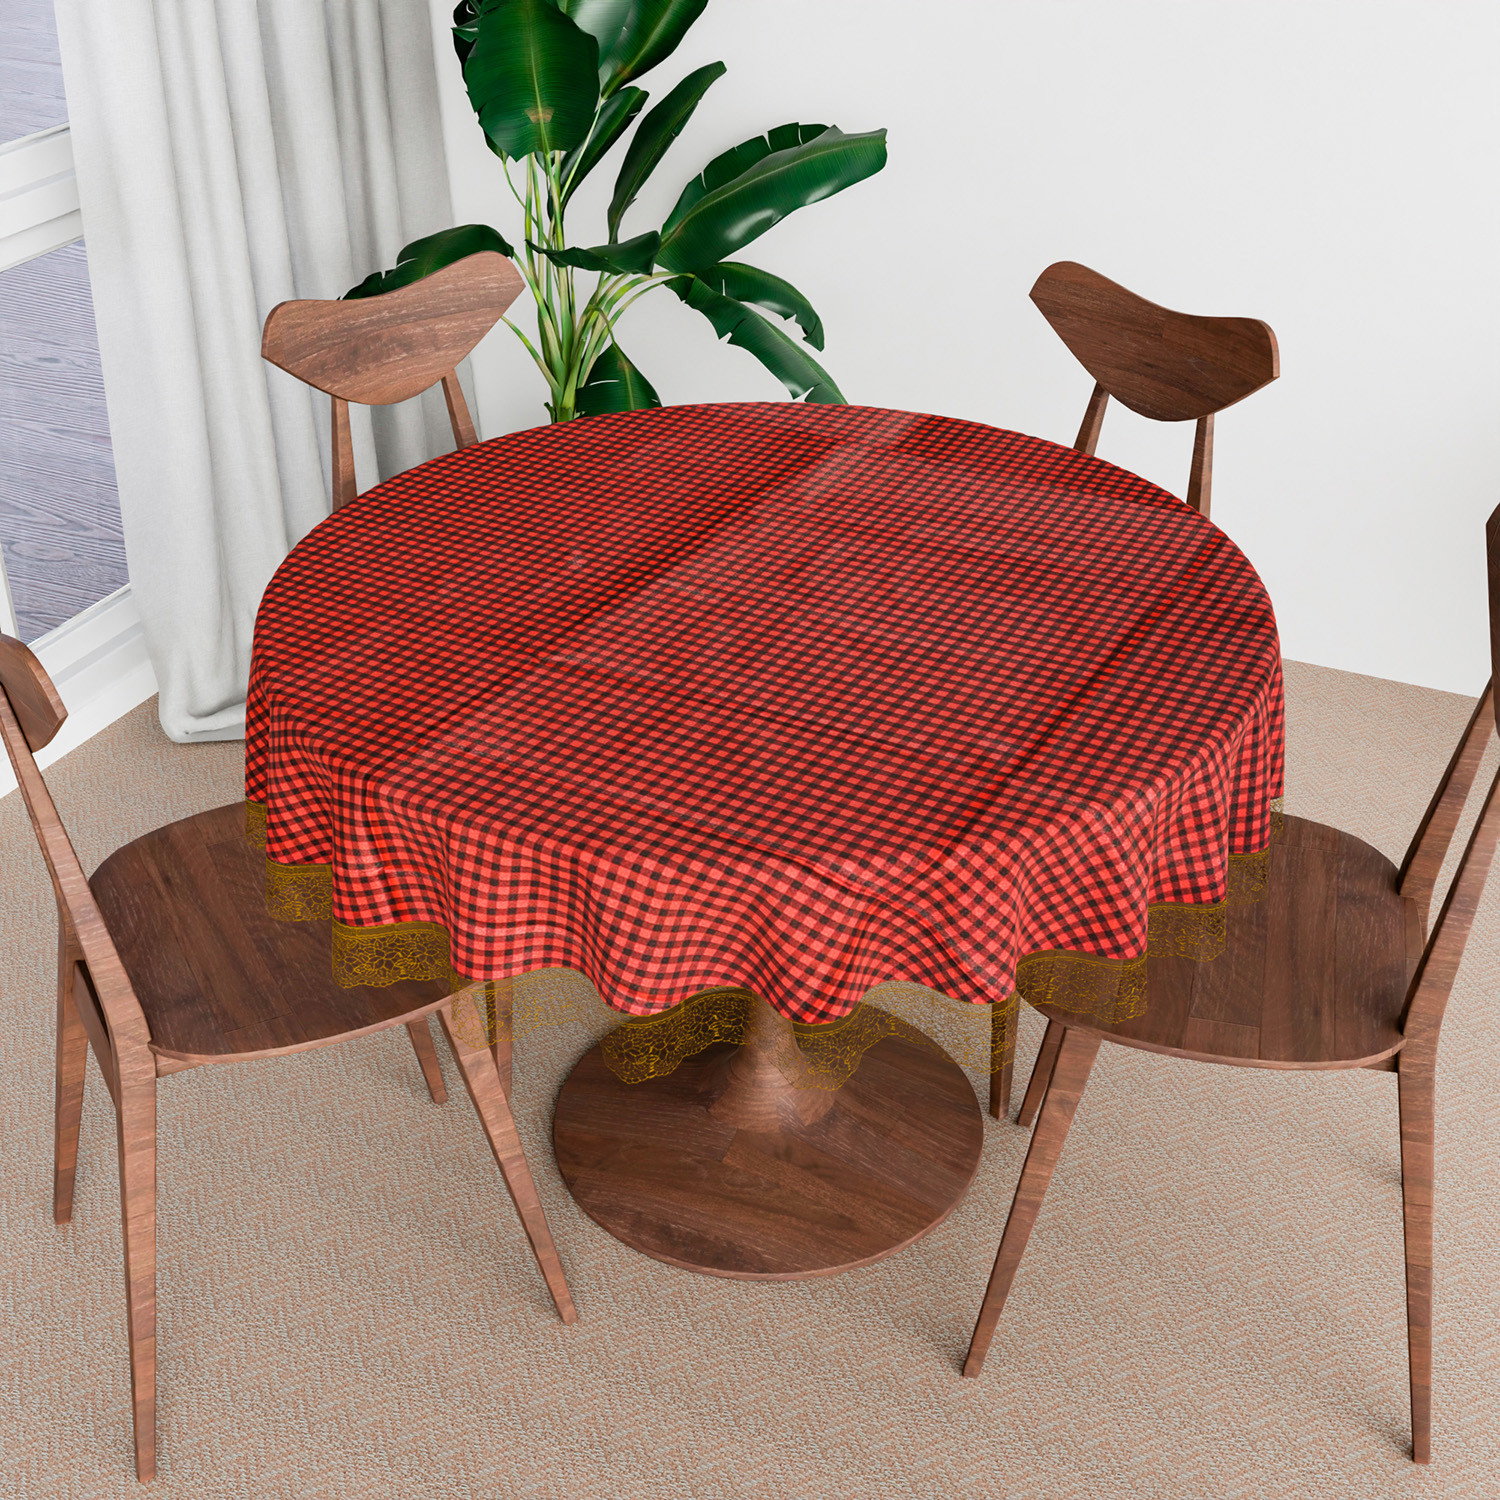 Kuber Industries Round Table Cover | Table Cloth for Round Tables | 4 Seater Round Table Cloth | Barik Check Kitchen Dining Tablecloth | Tabletop Cover | 60 Inch | Maroon